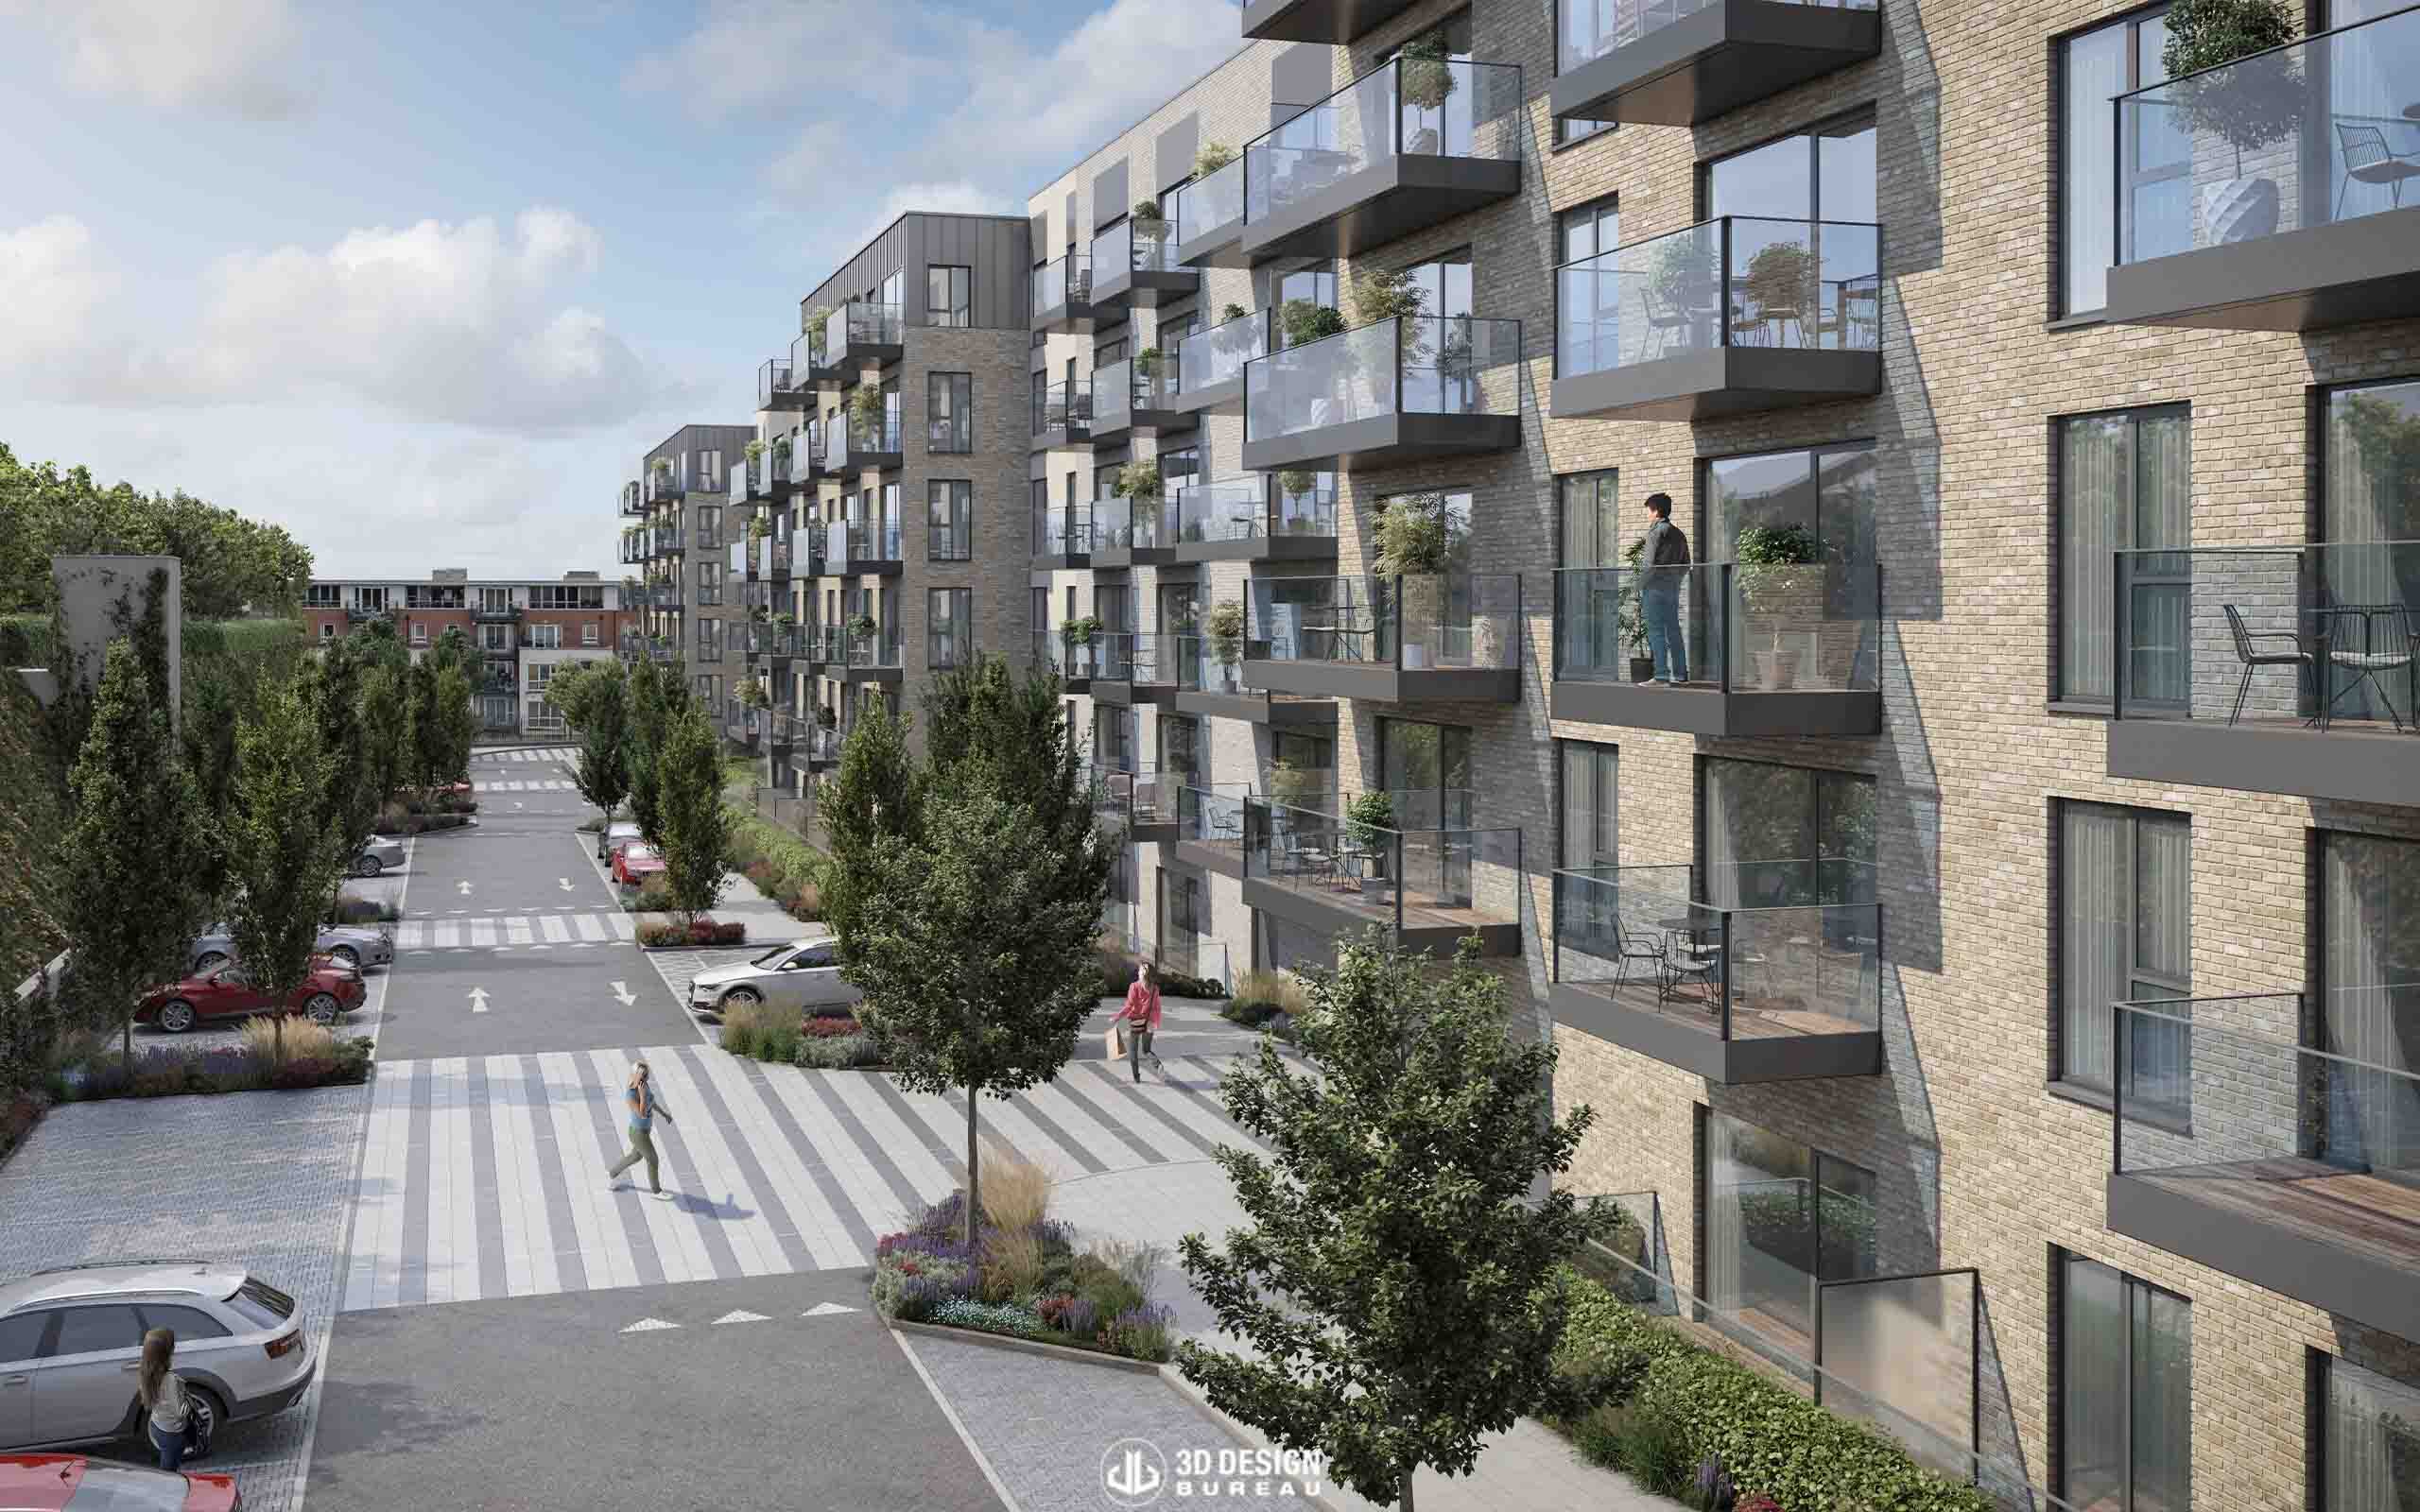 Computer generated imagery of the proposed development in Glasnevin